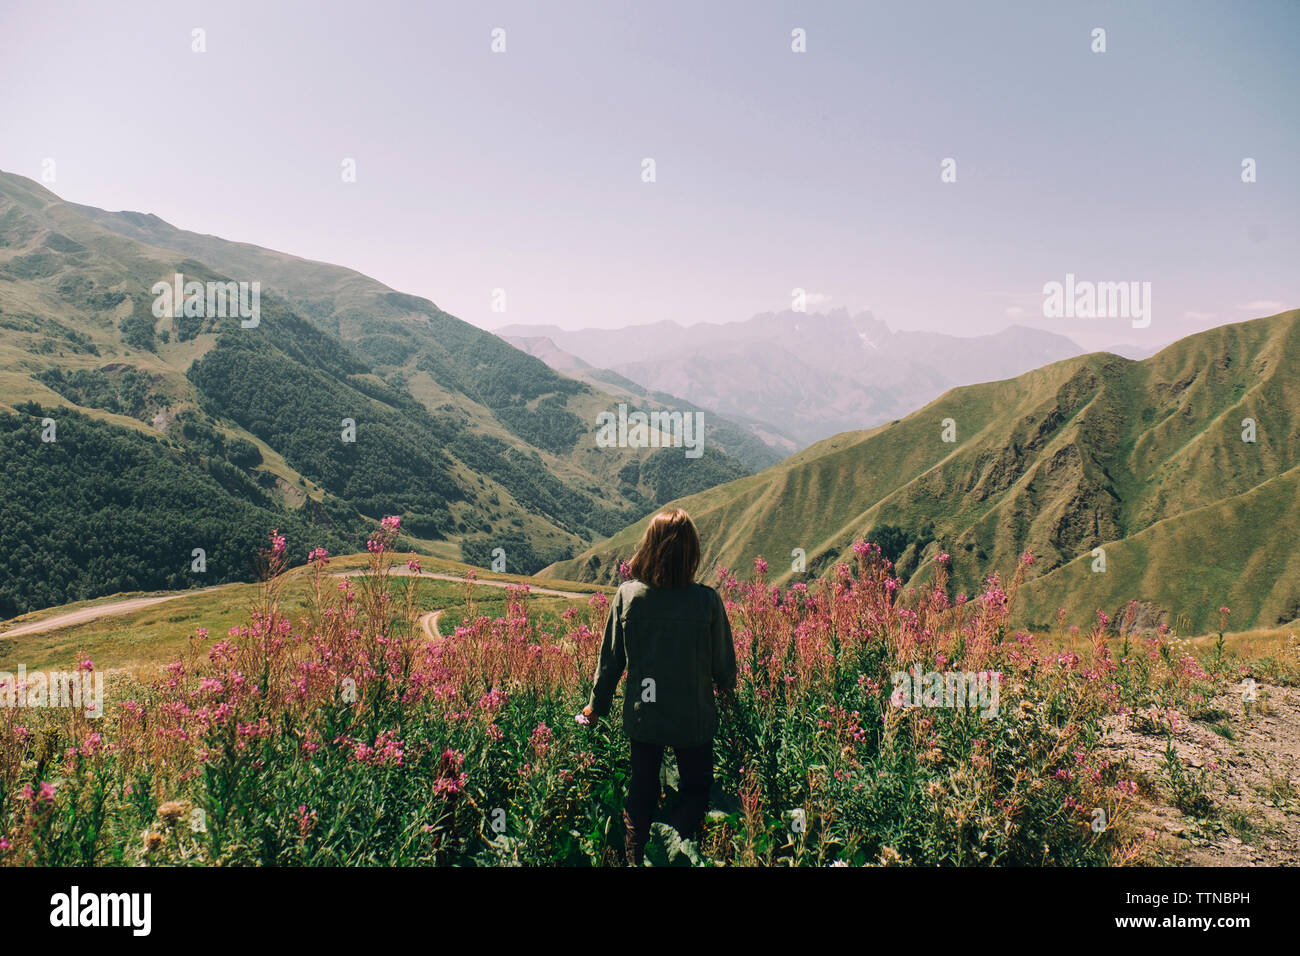 Rear view of woman looking at mountains while standing amidst plants against clear sky during sunny day Stock Photo